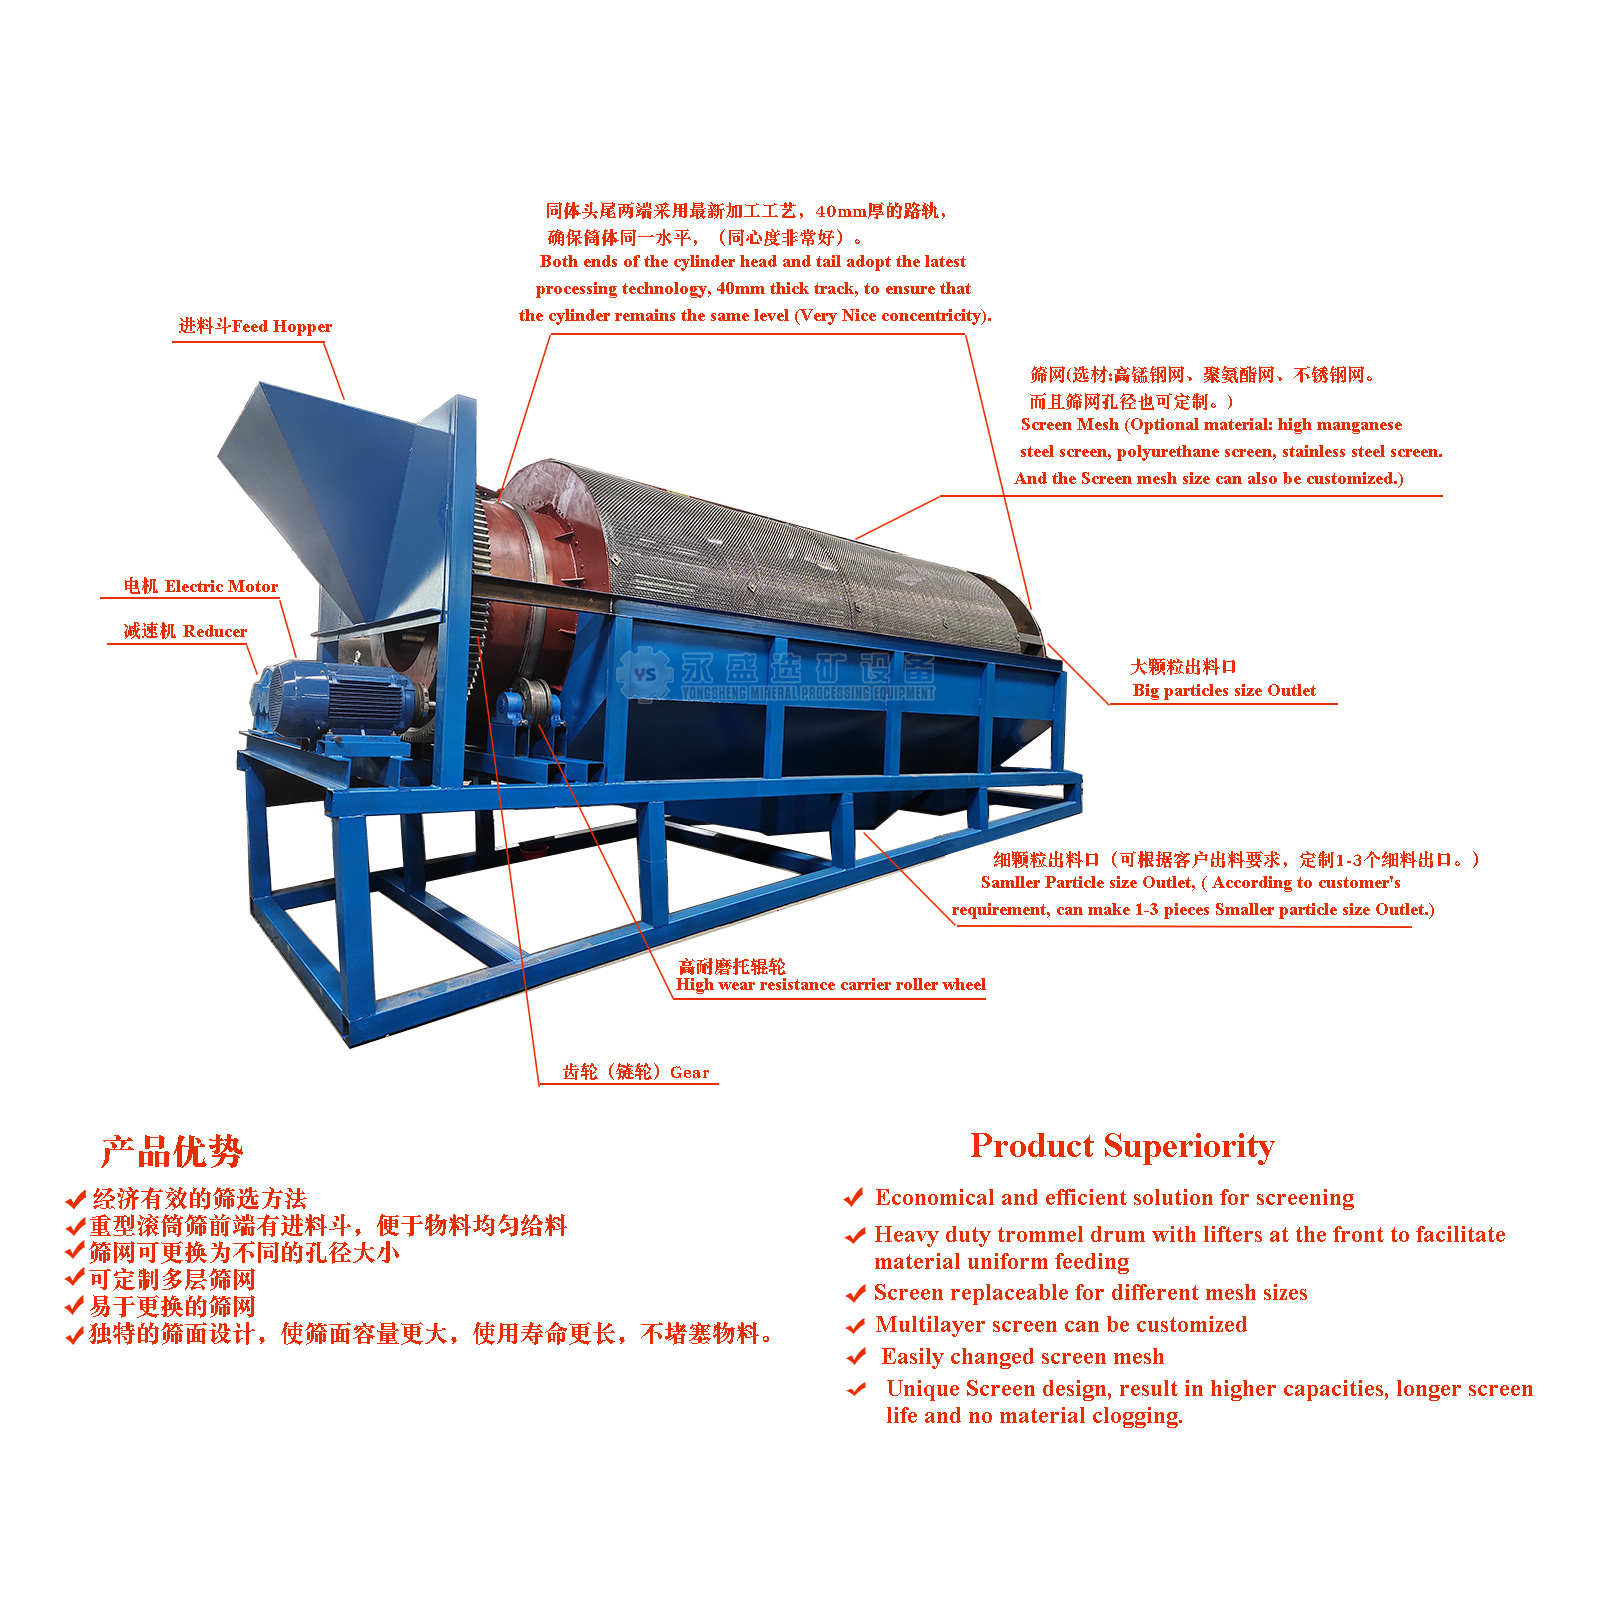 Yongsheng Mineral Processing Equipment Manufacturing Co